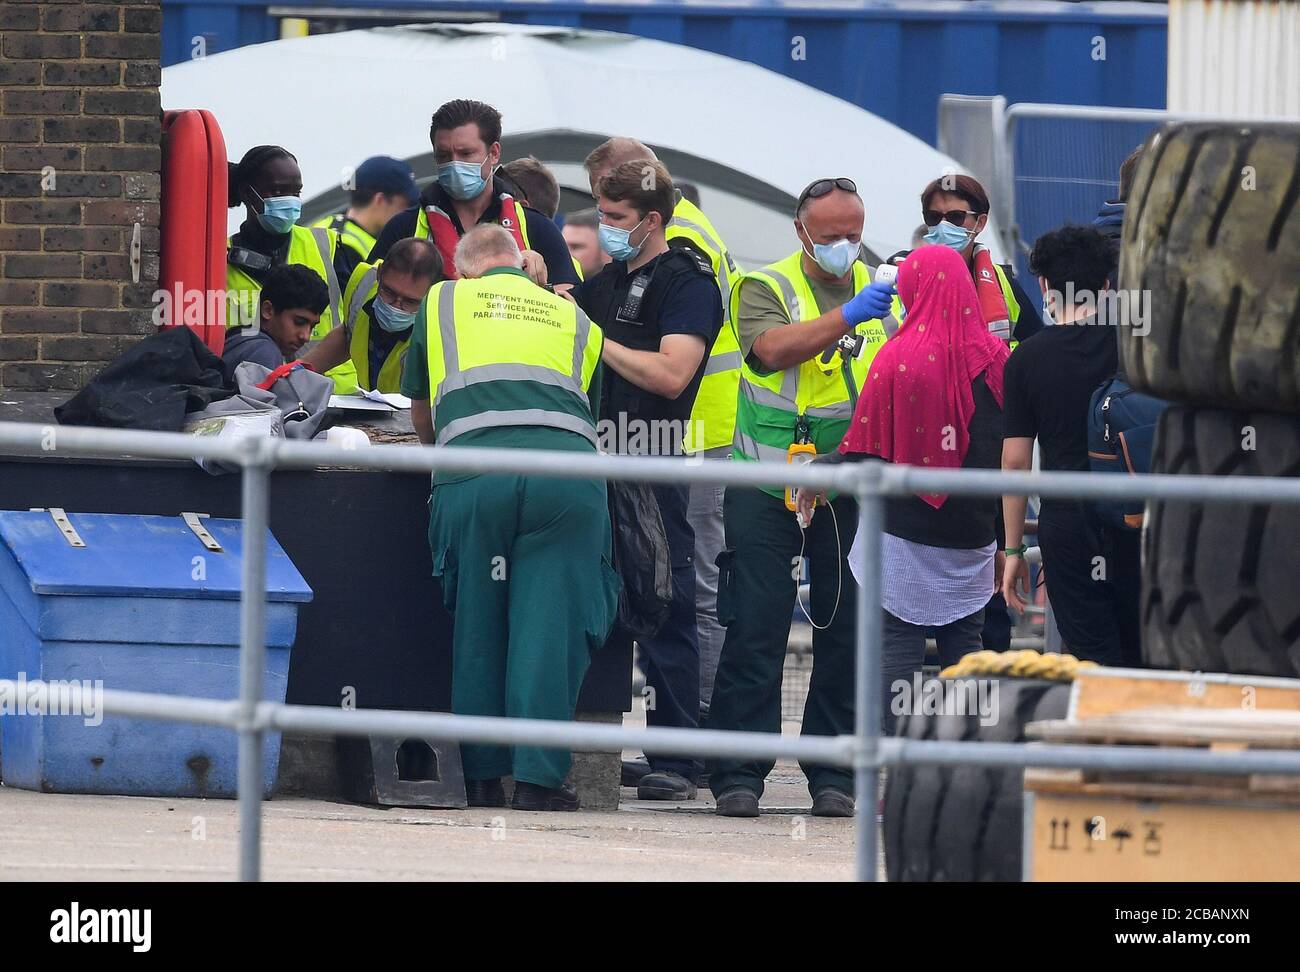 A group of people thought to be migrants have their temperature checked as they are brought into Dover, Kent, by Border Force officers following a number of small boat incidents in the Channel earlier today. Stock Photo